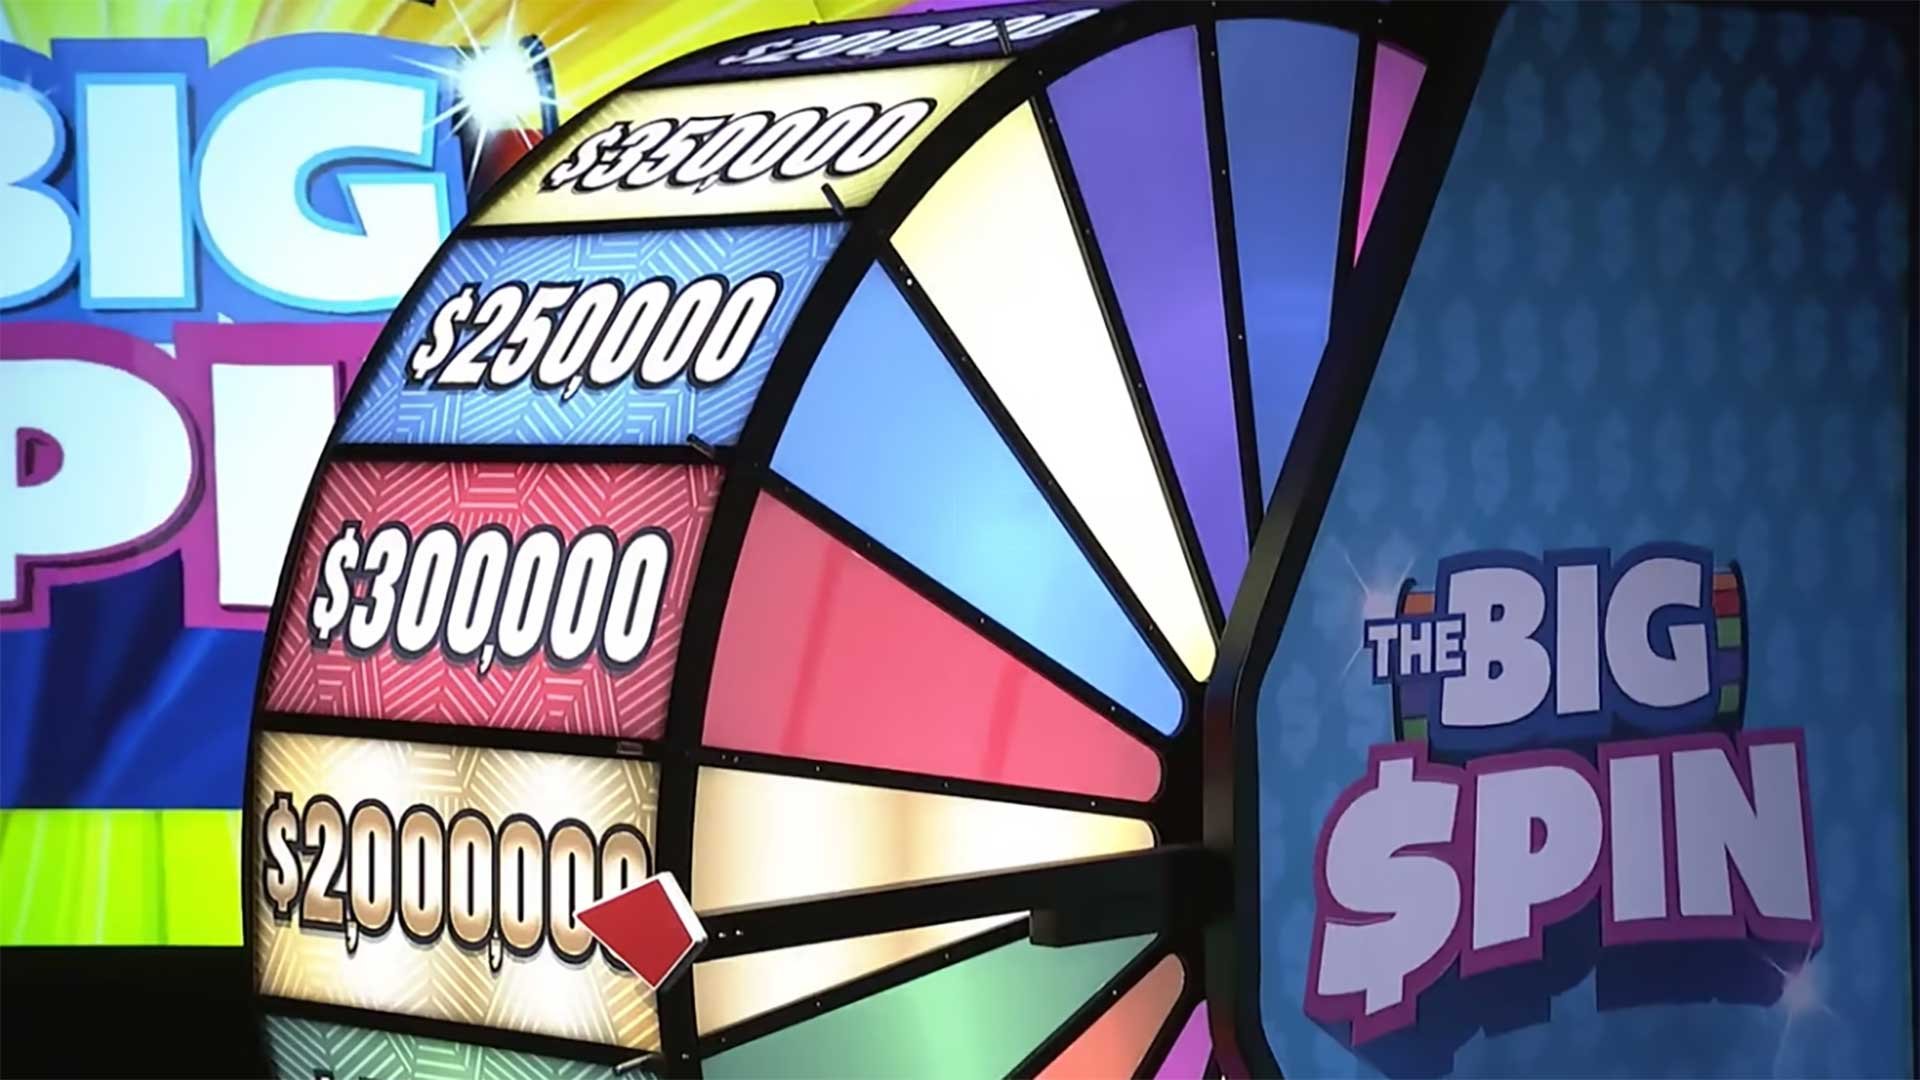 The Big Spin $1 million